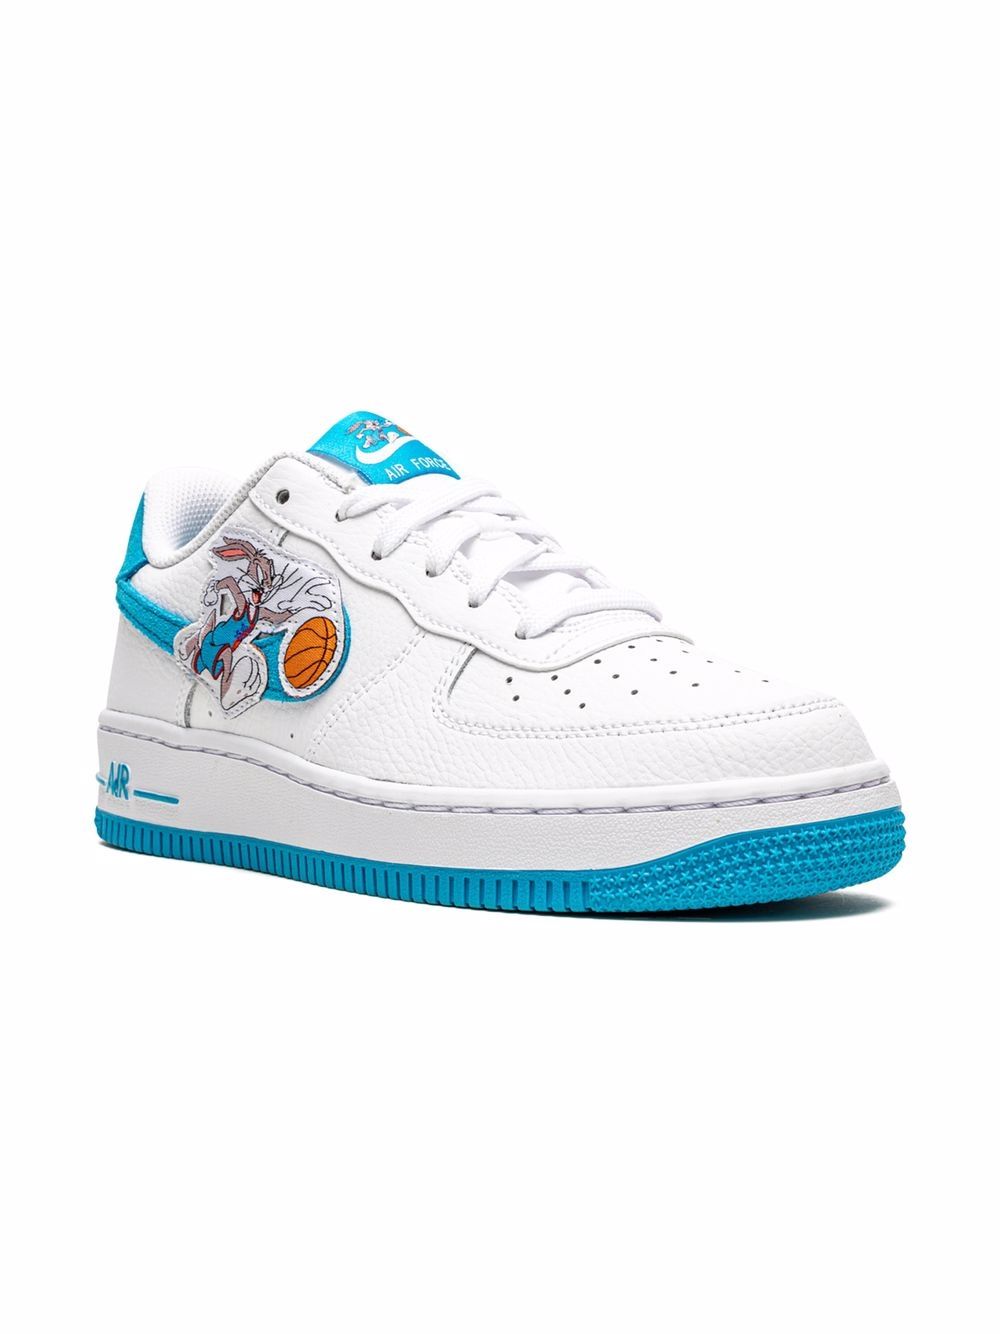 Nike Kids x Space Jam Air Force 1 Low "Hare" sneakers - White von Nike Kids